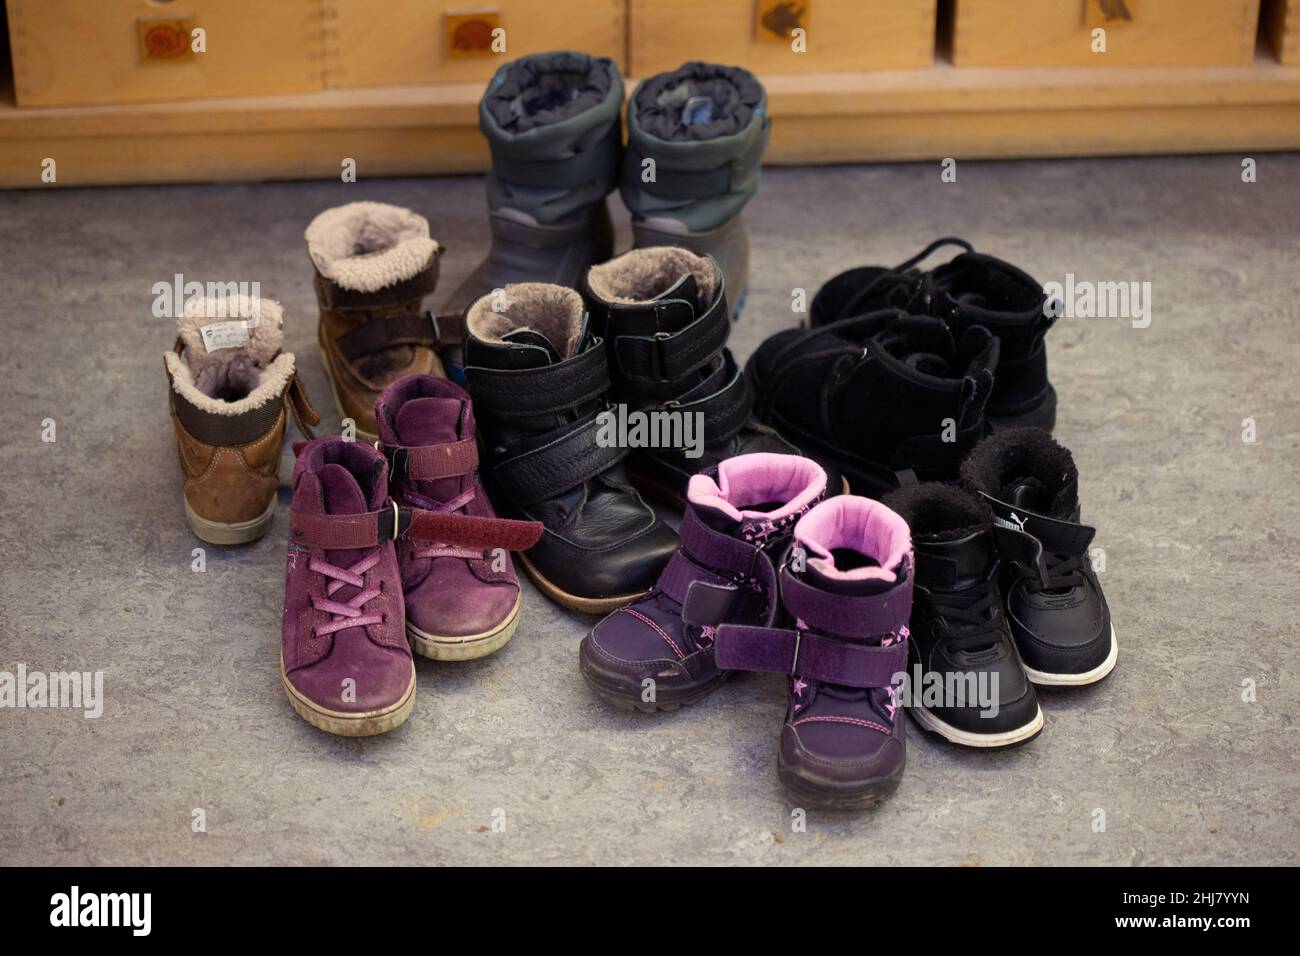 Bielefeld, Germany. 26th Jan, 2022. Rubber boots with soil under the soles  are stuck in a rack for used boots at a daycare center (Kita). Pool tests  ("lollipop tests") are to be